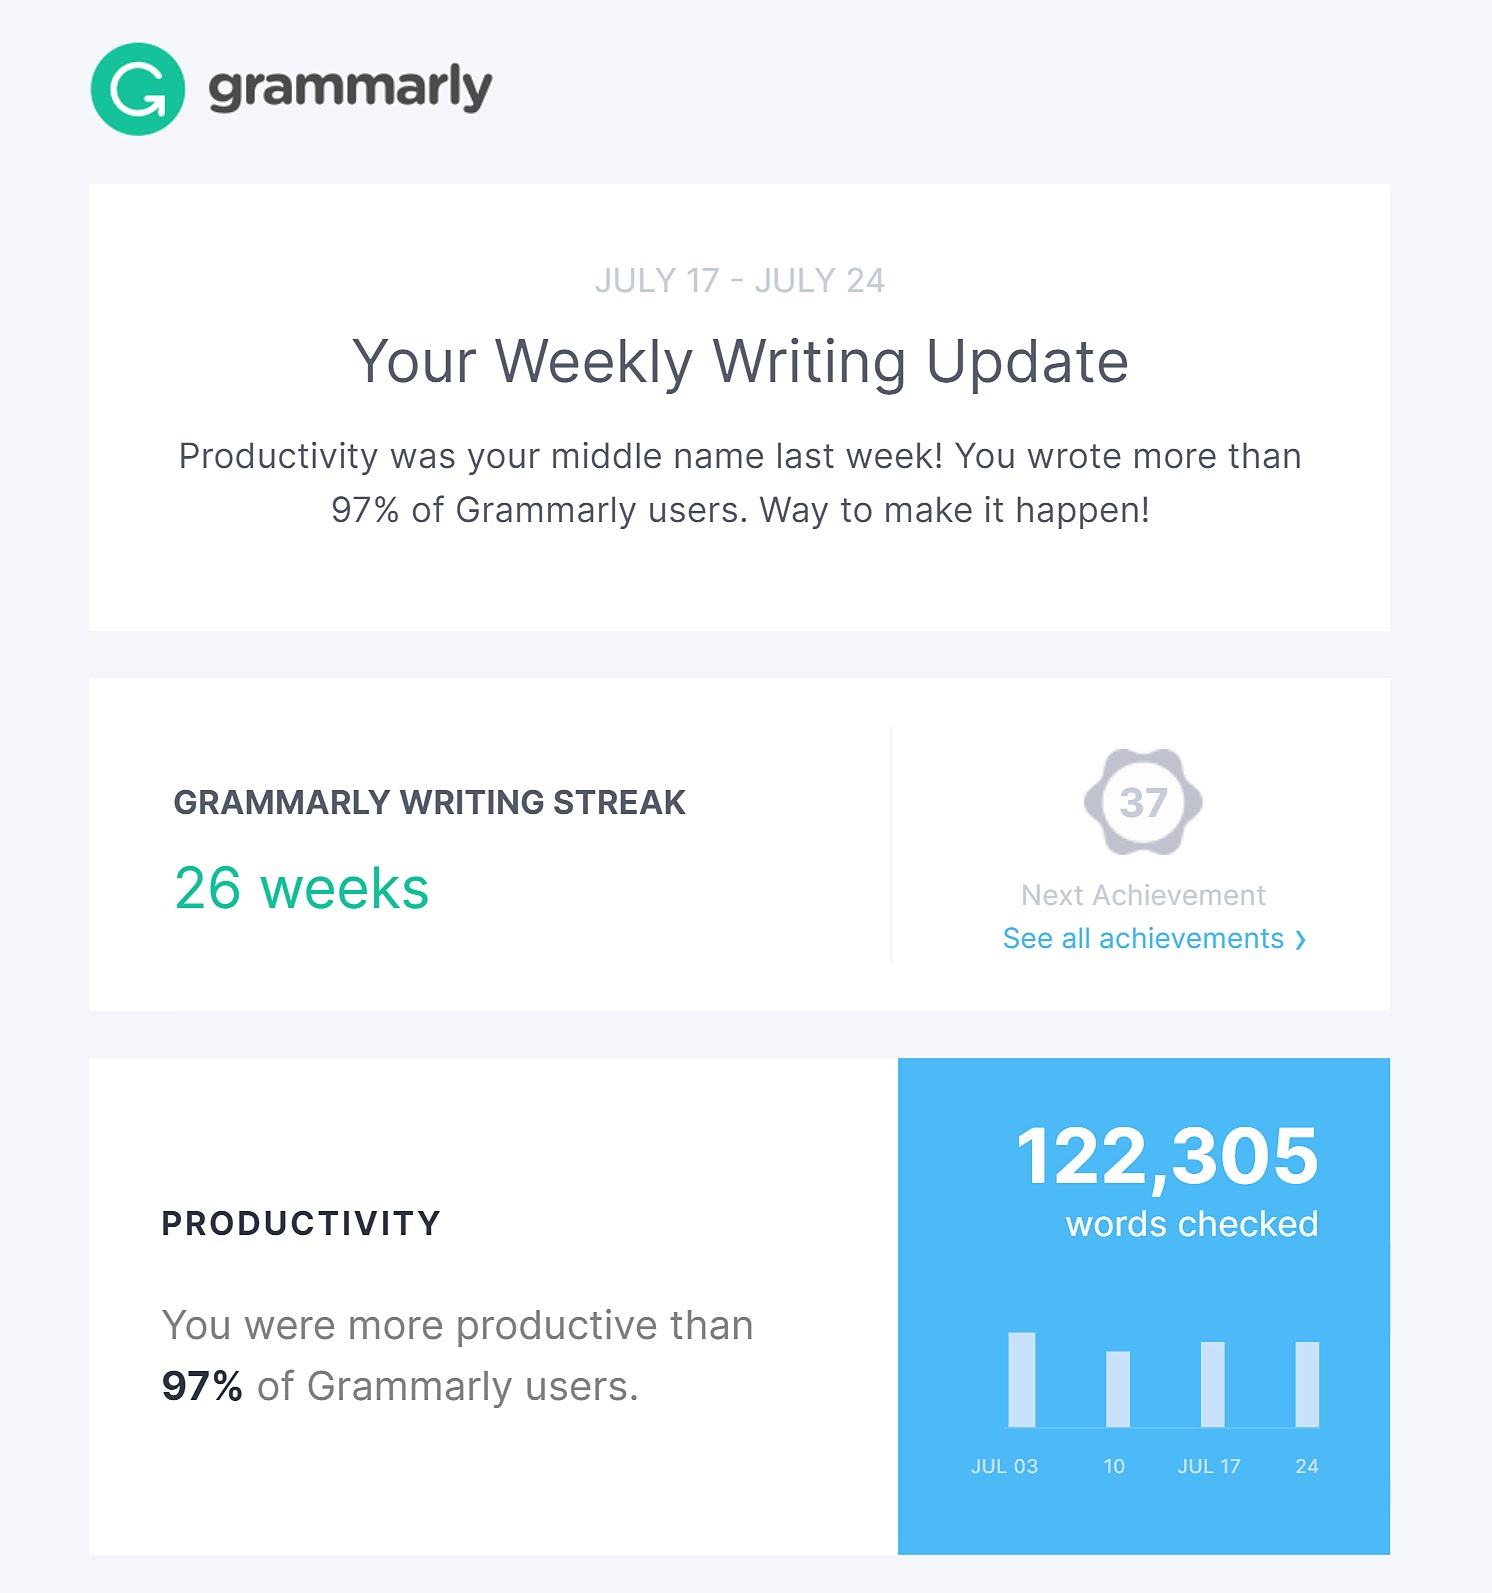 Grammarly's email on user's weekly writing updates